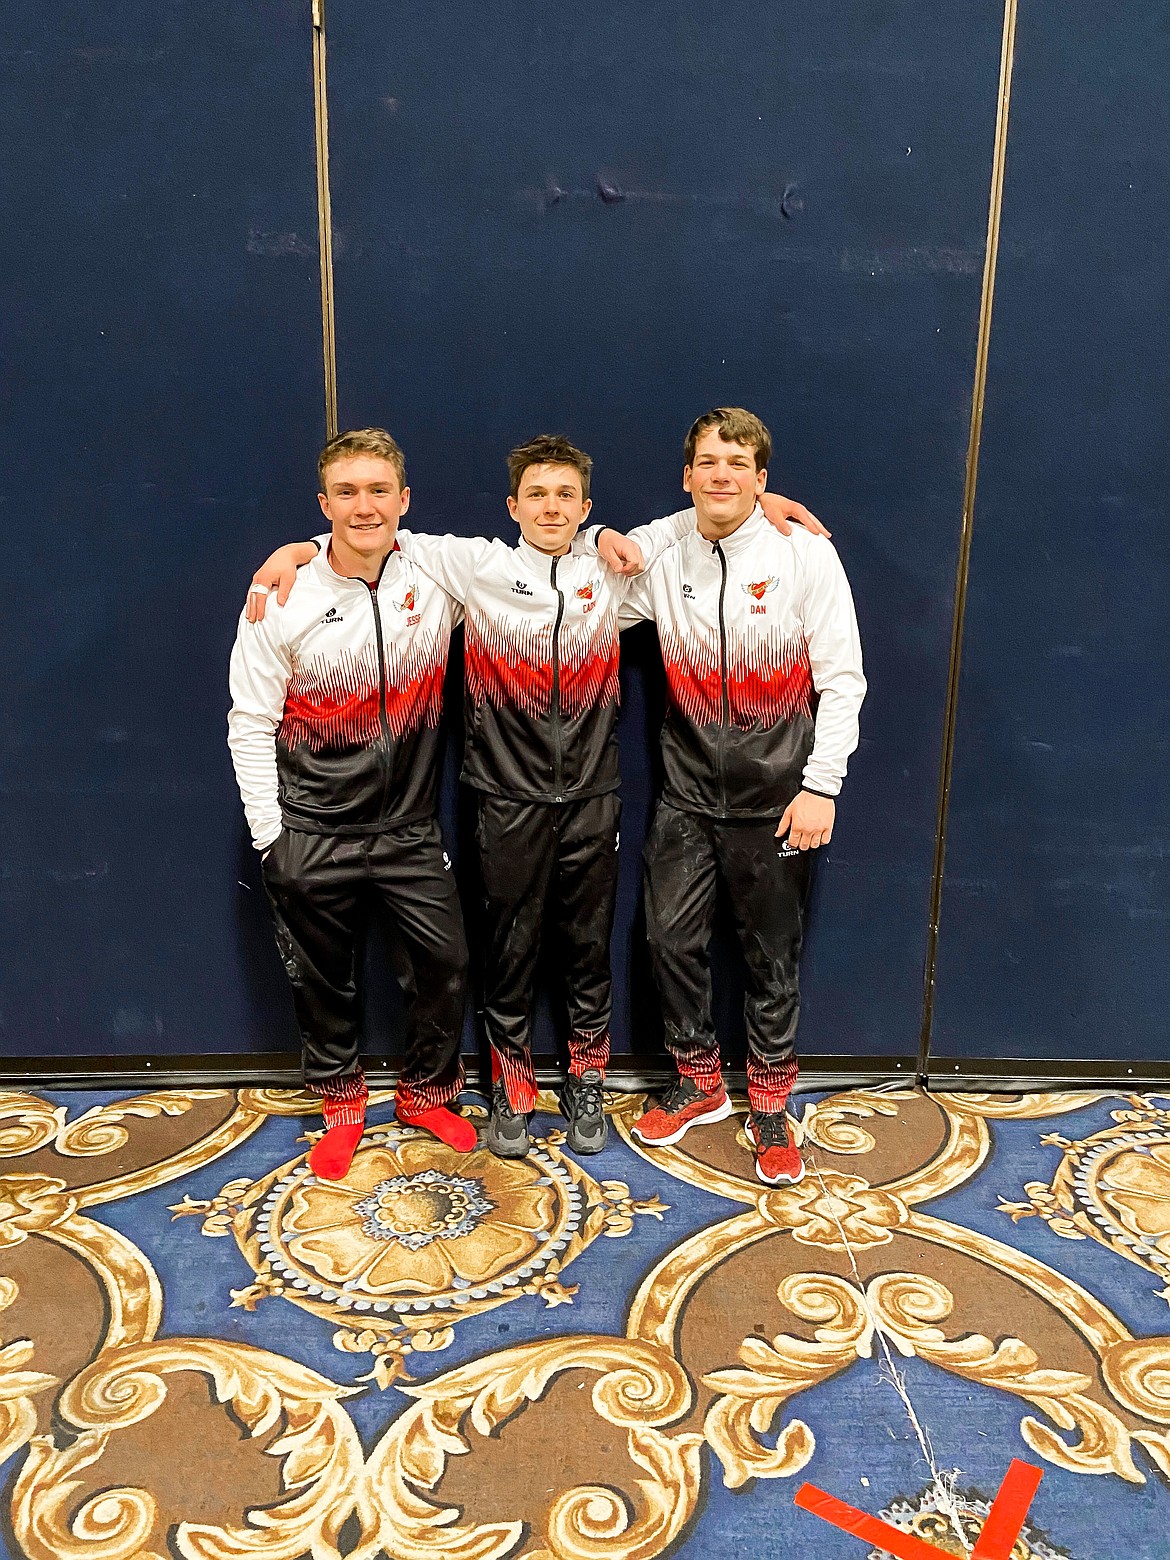 Courtesy photo
Avant Coeur Level 10 Boys take 4th Place Team at the BlackJack Competition in Las Vegas. From left are Jesse St. Onge, Caden Severtson and Daniel Fryling.